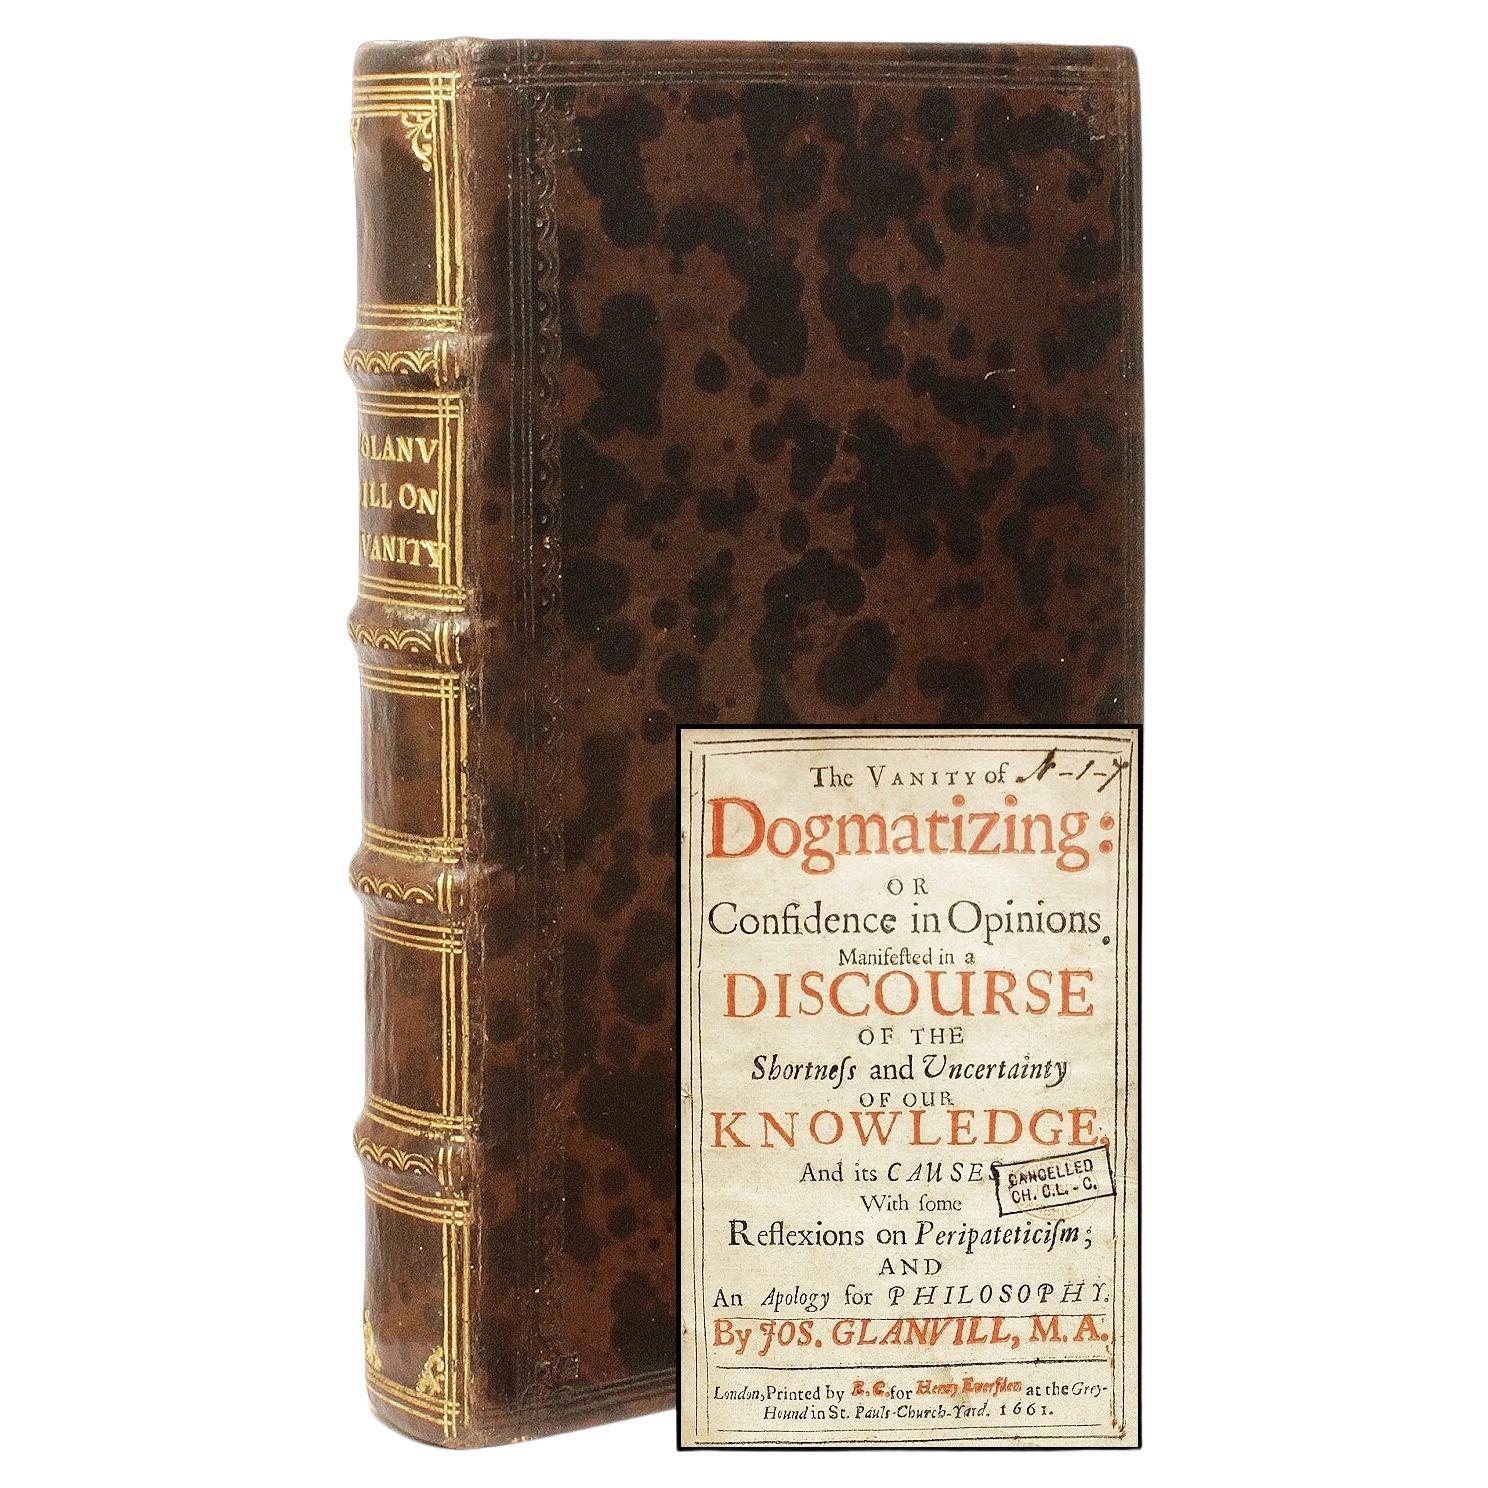 Joseph GLANVILL. The Vanity of Dogmatizing. FIRST EDITION - 1661 - HIS 1st BOOK! For Sale